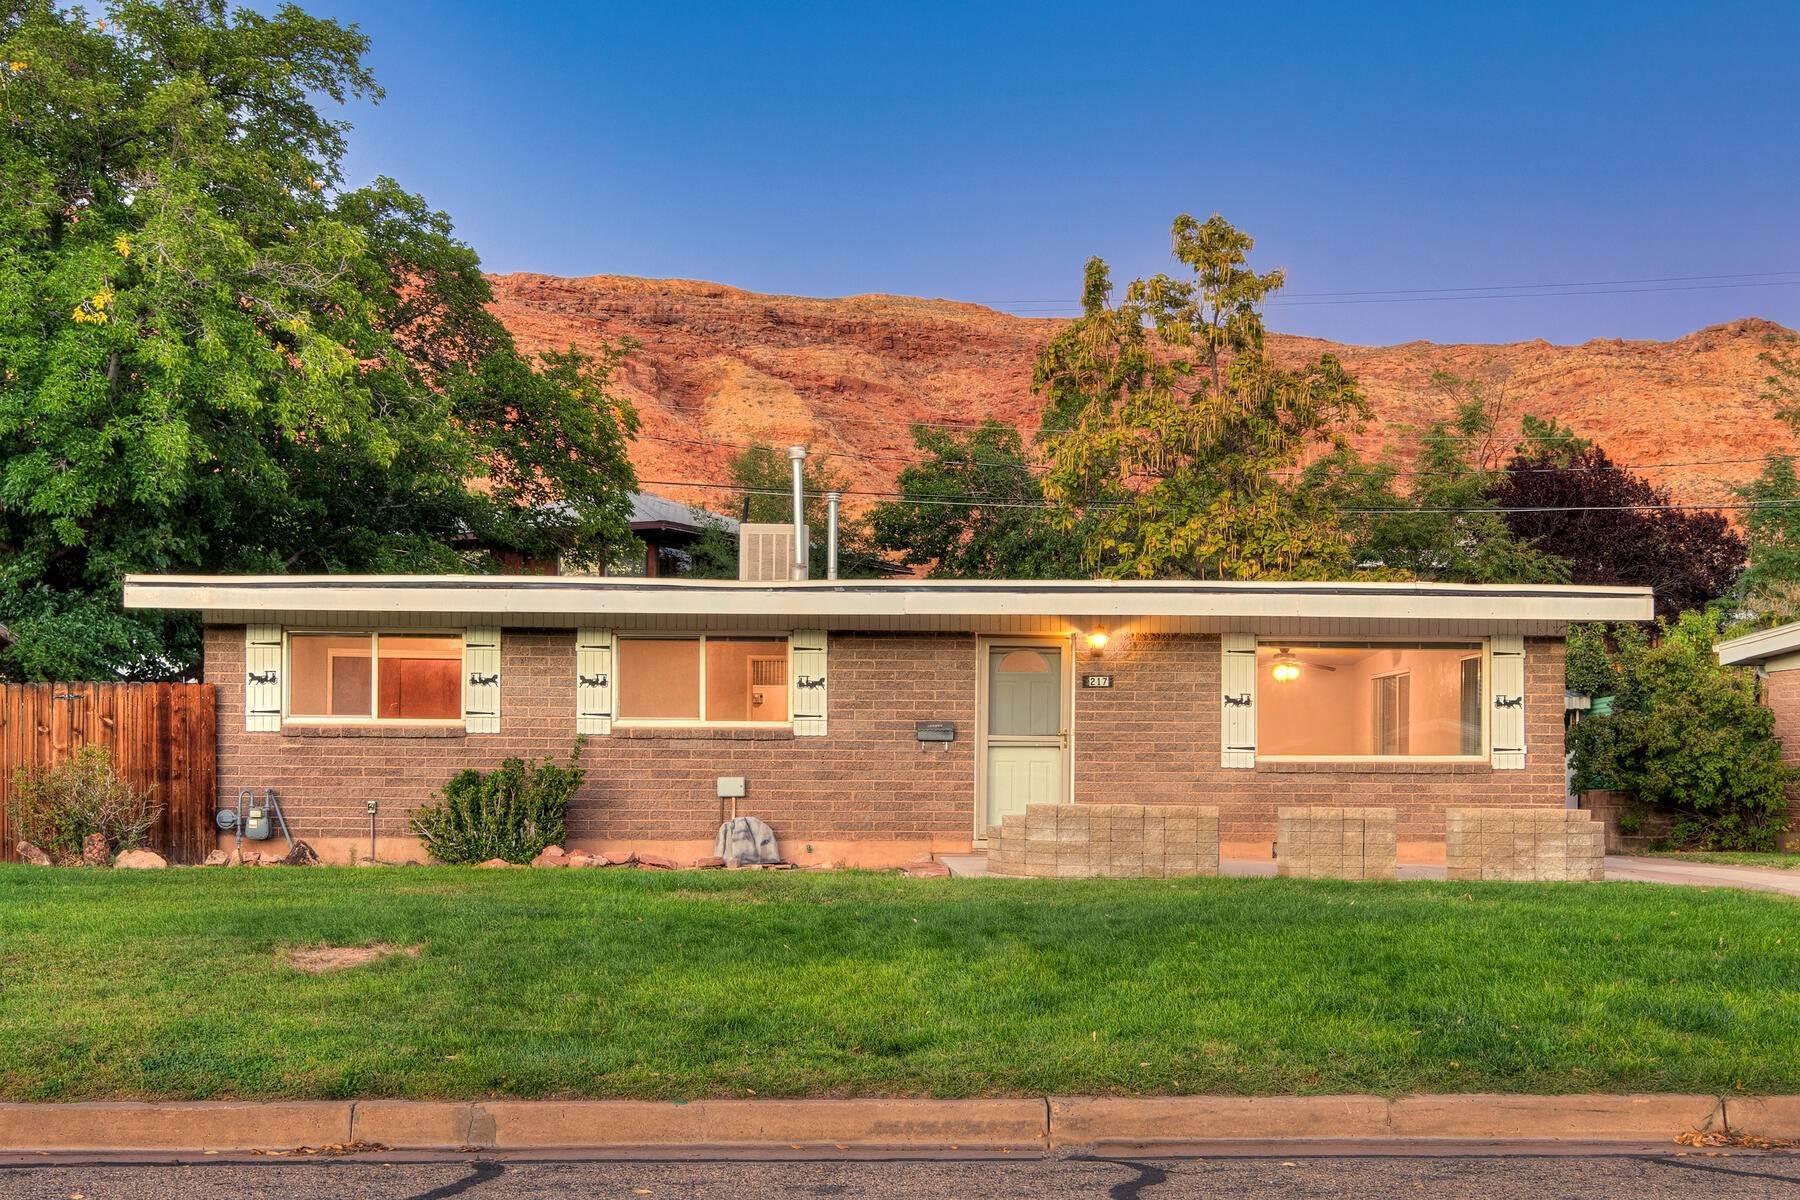 Single Family Homes for Sale at Wonderful In-town East Side Neighborhood 217 Tusher Street Moab, Utah 84532 United States